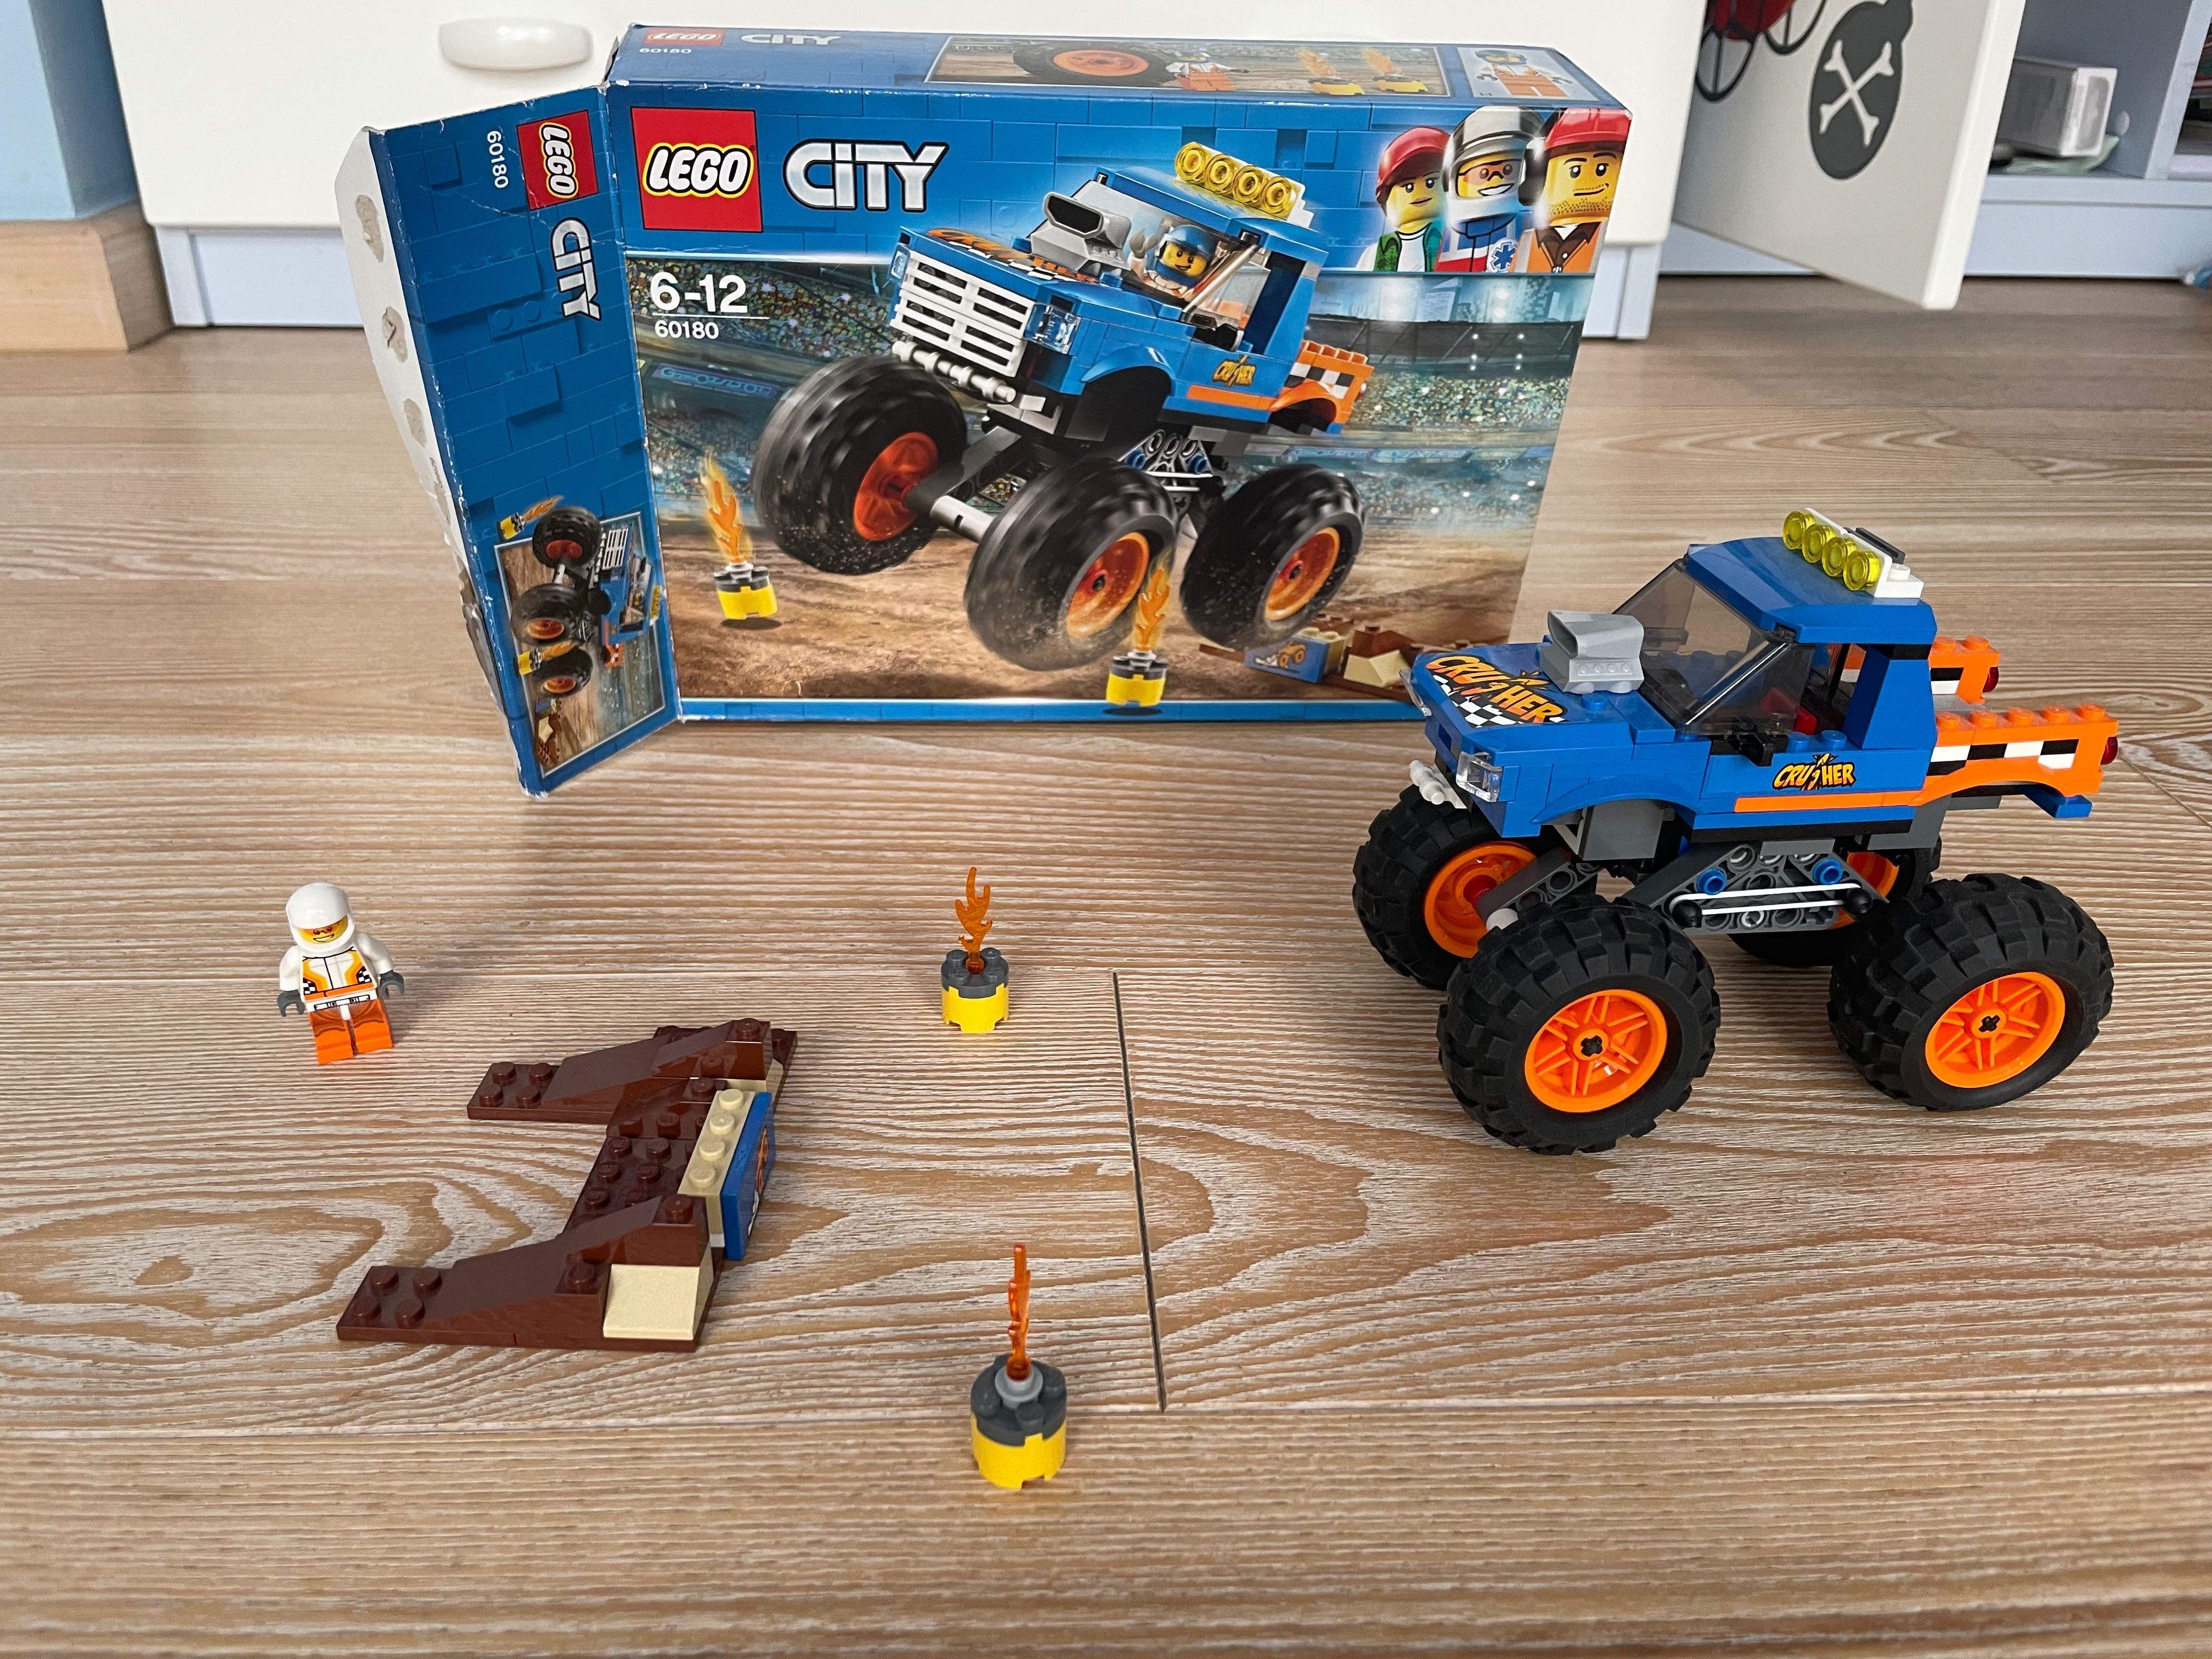 Lego City 60180 Moster Truck